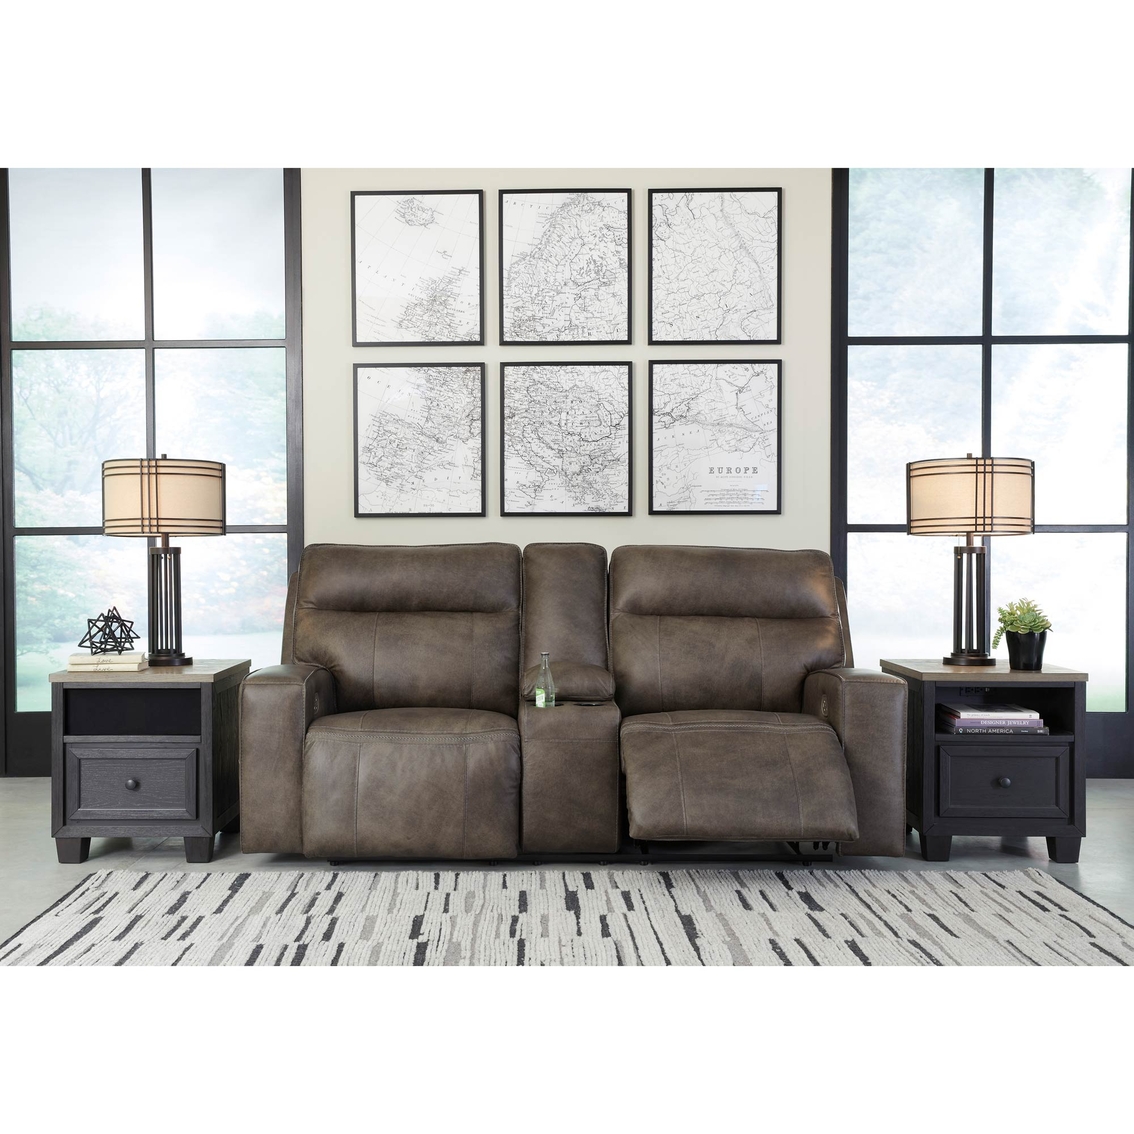 Signature Design by Ashley Game Plan Power Reclining Loveseat - Image 6 of 9